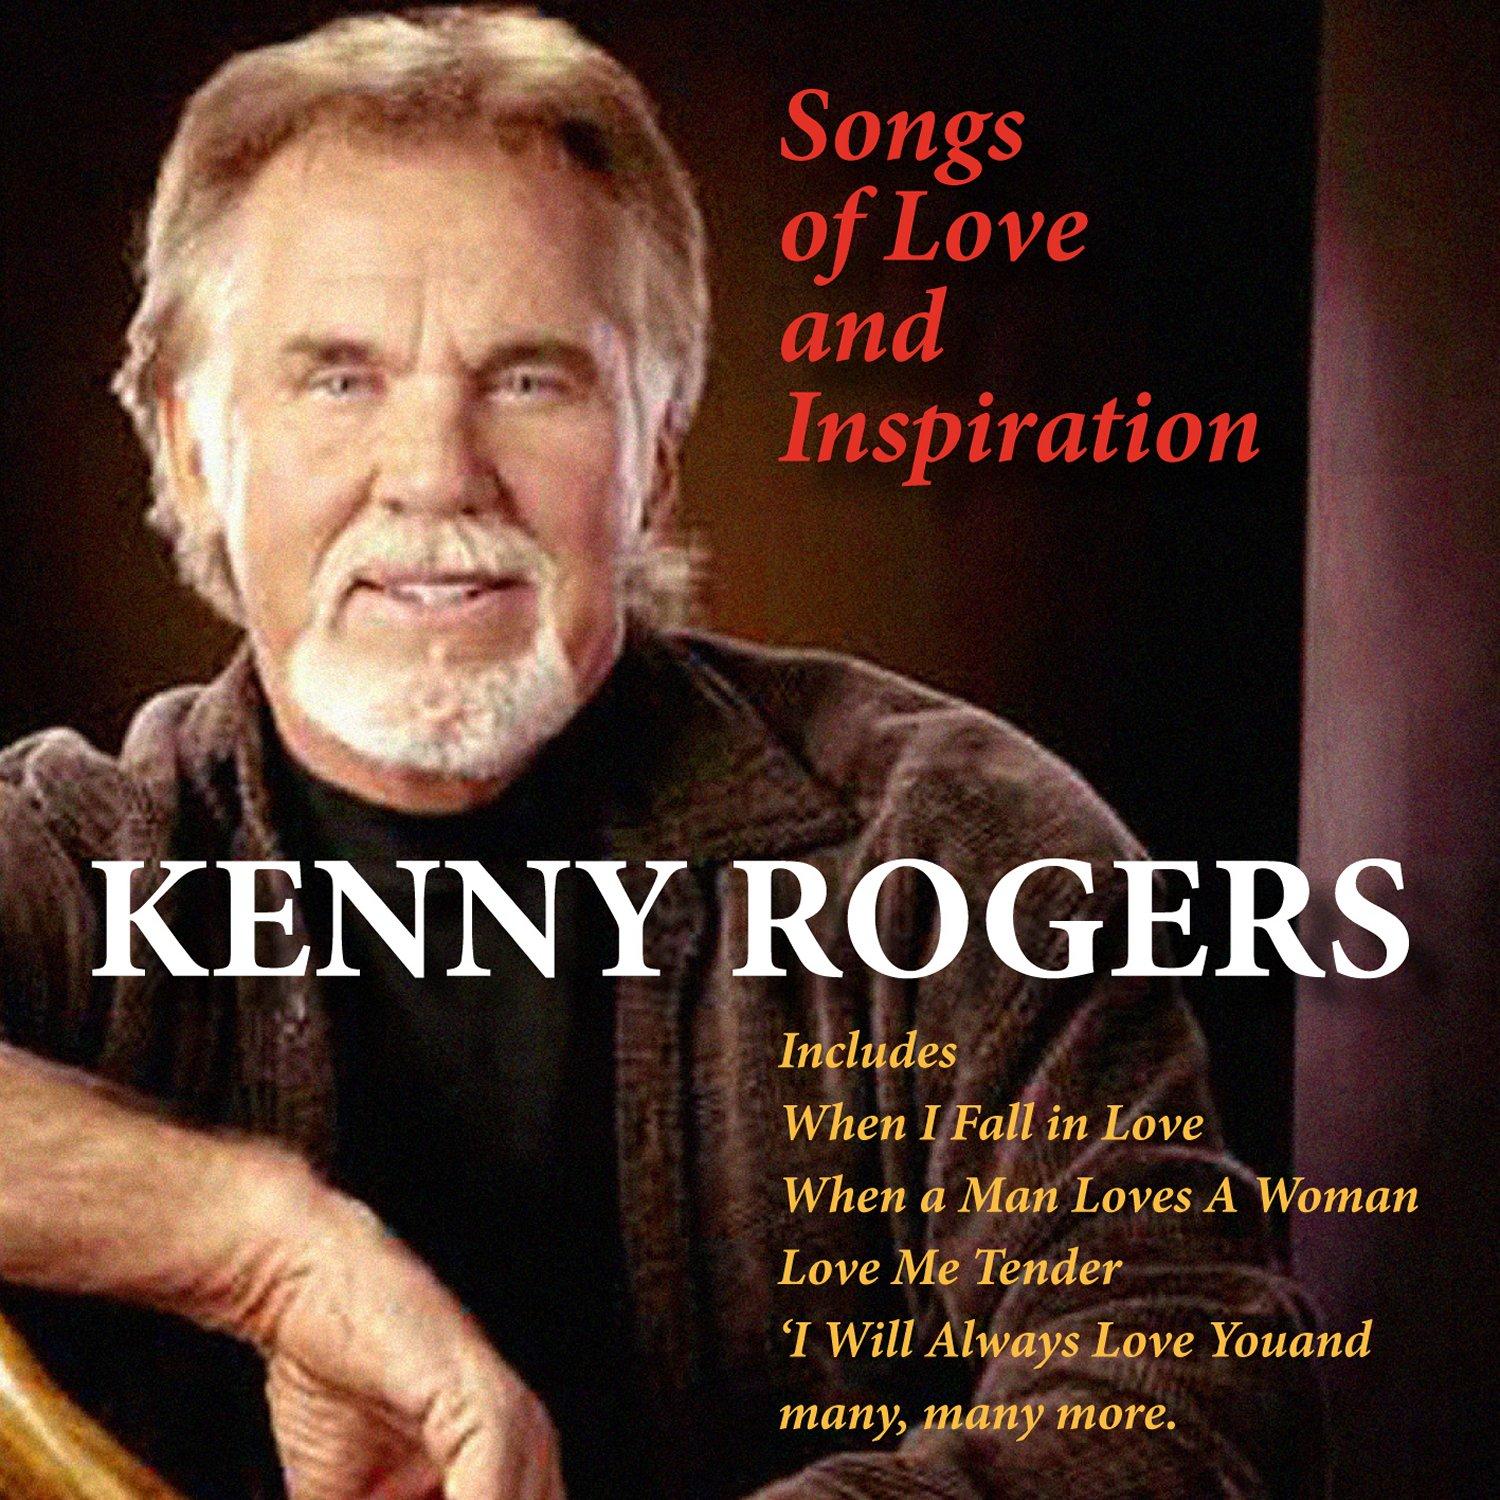 Songs of Love & Inspiration